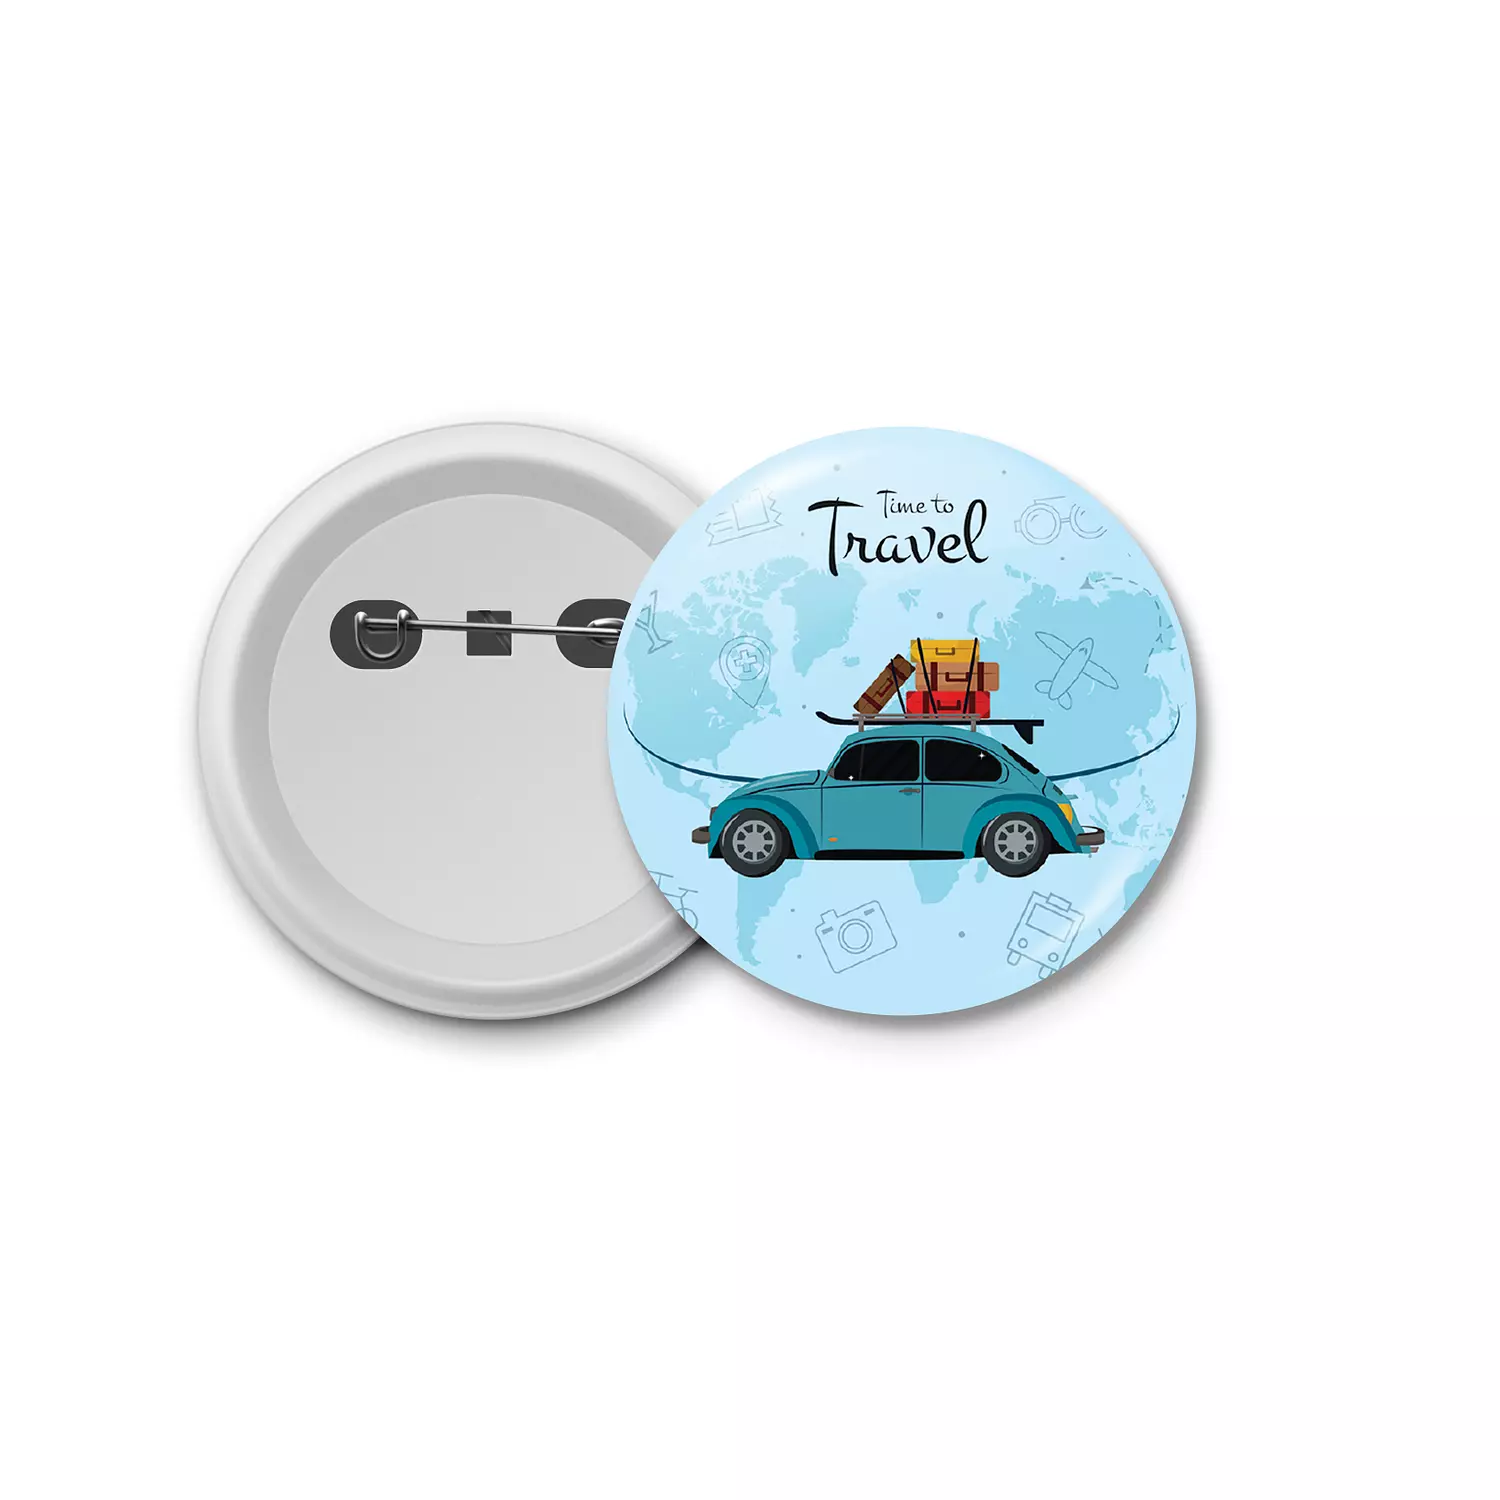 Time to Travel - Positive Quotes  hover image